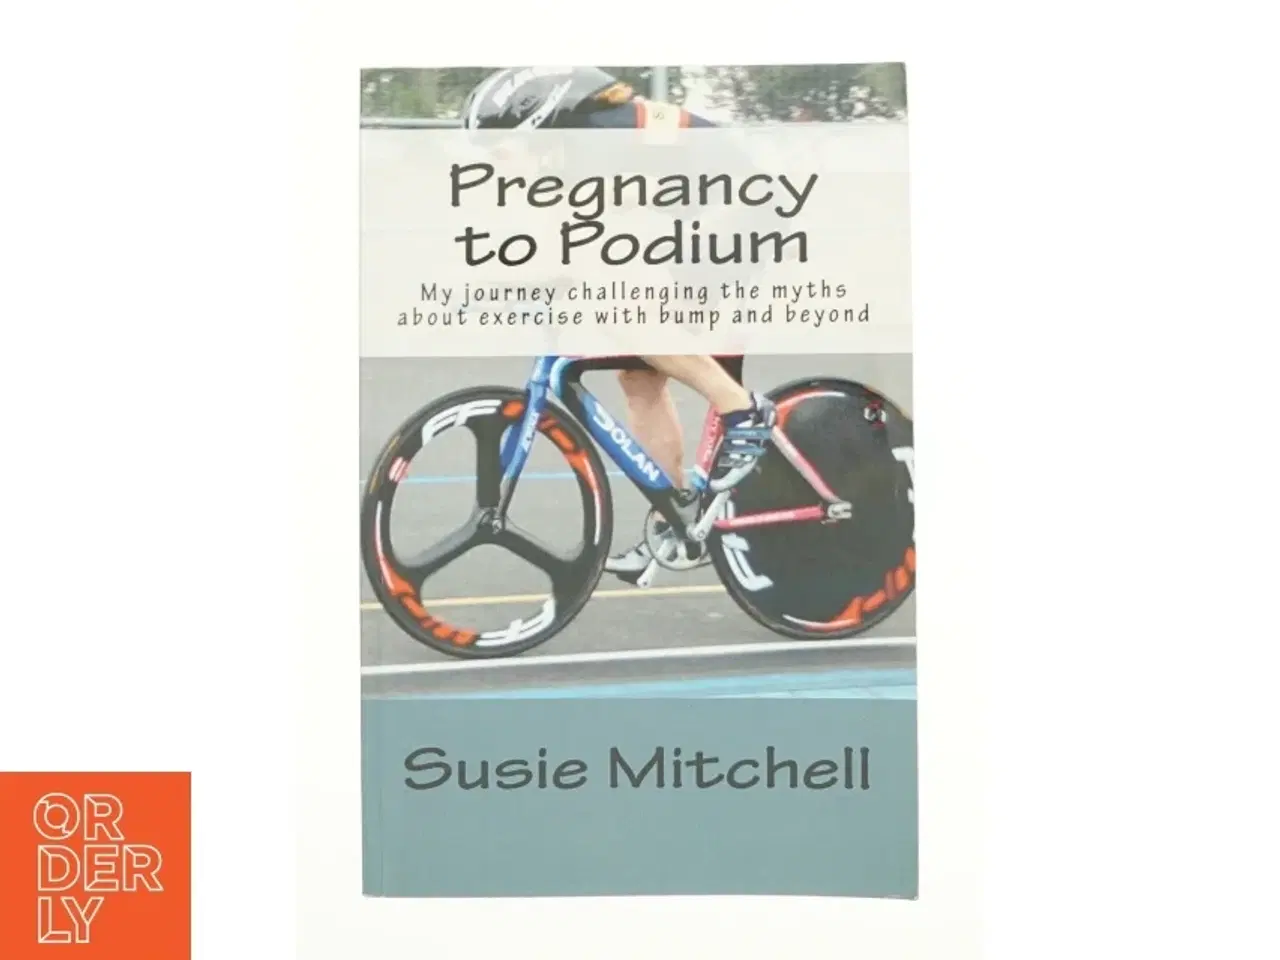 Billede 1 - Pregnancy to Podium : My Journey Challenging the Myths About Exercise with Bump and Beyond by Susie Mitchell af Susie Mitchell (Bog)